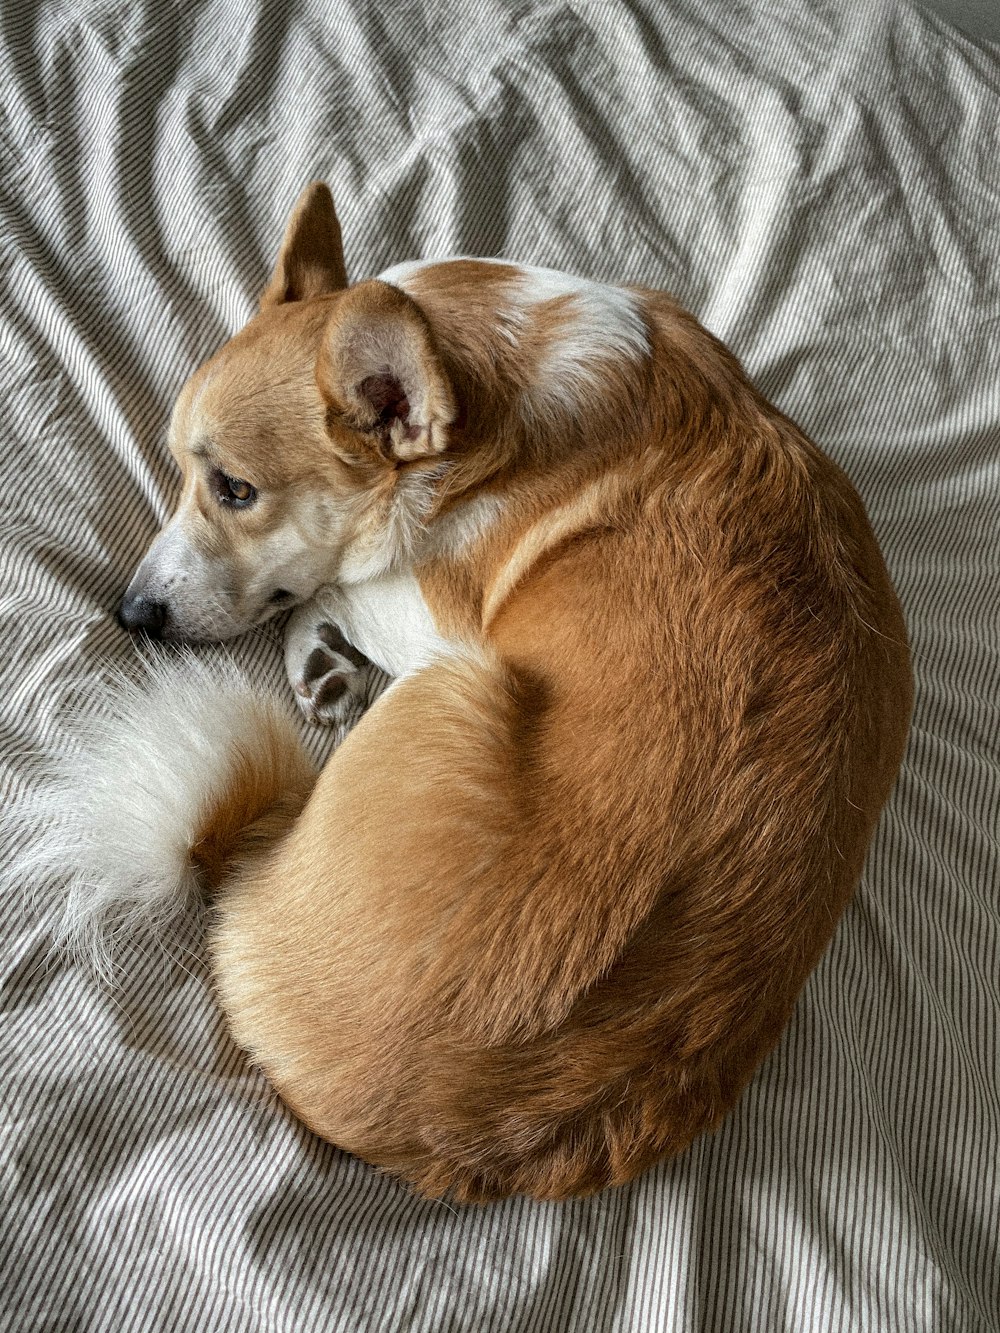 brown and white short coated dog lying on gray and white textile